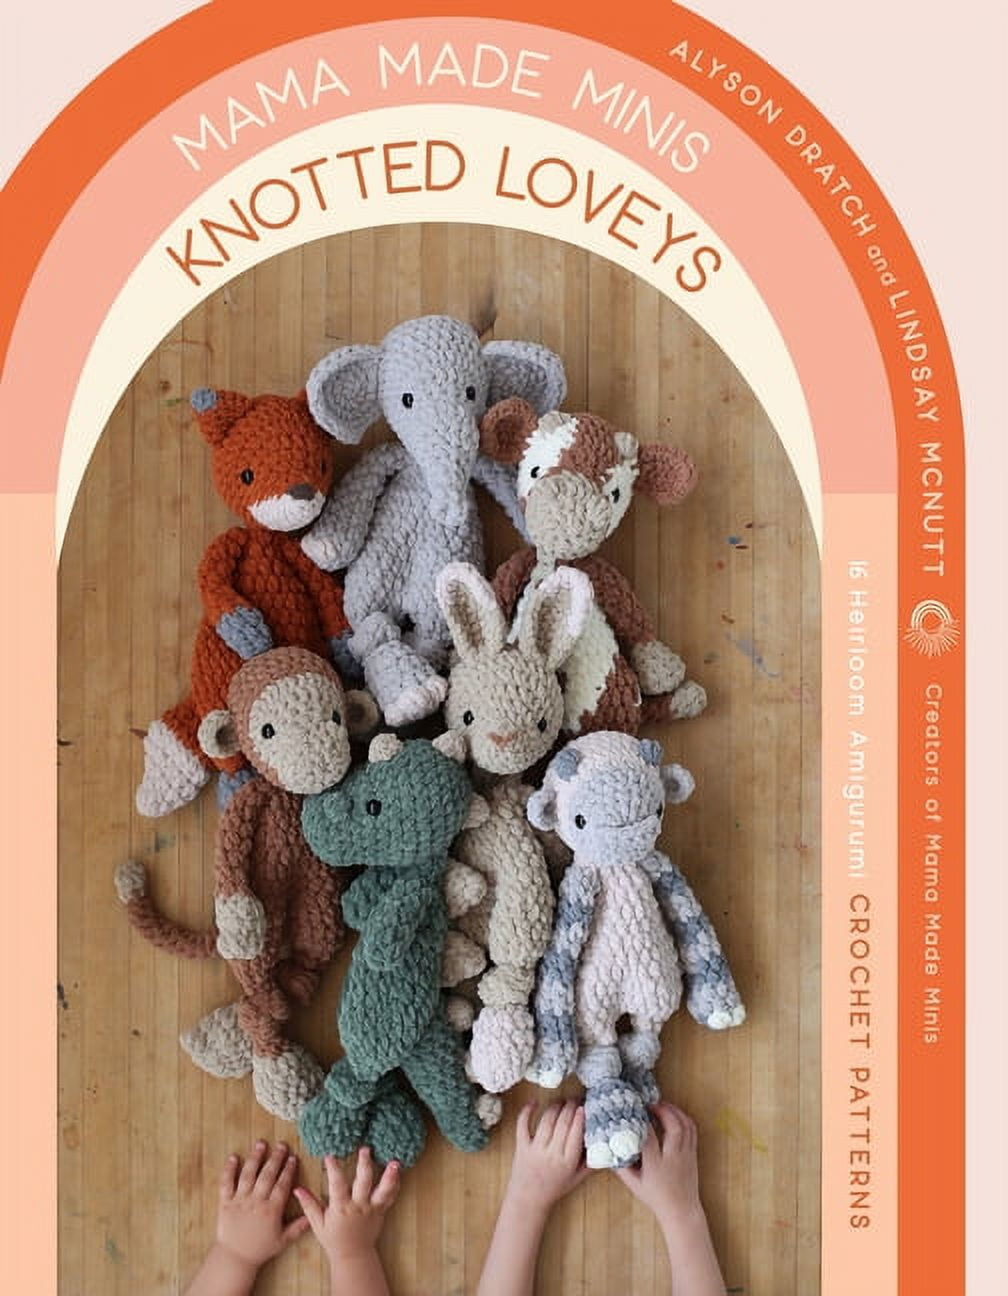 Mama Made minis - Search -  - Free Download Patterns